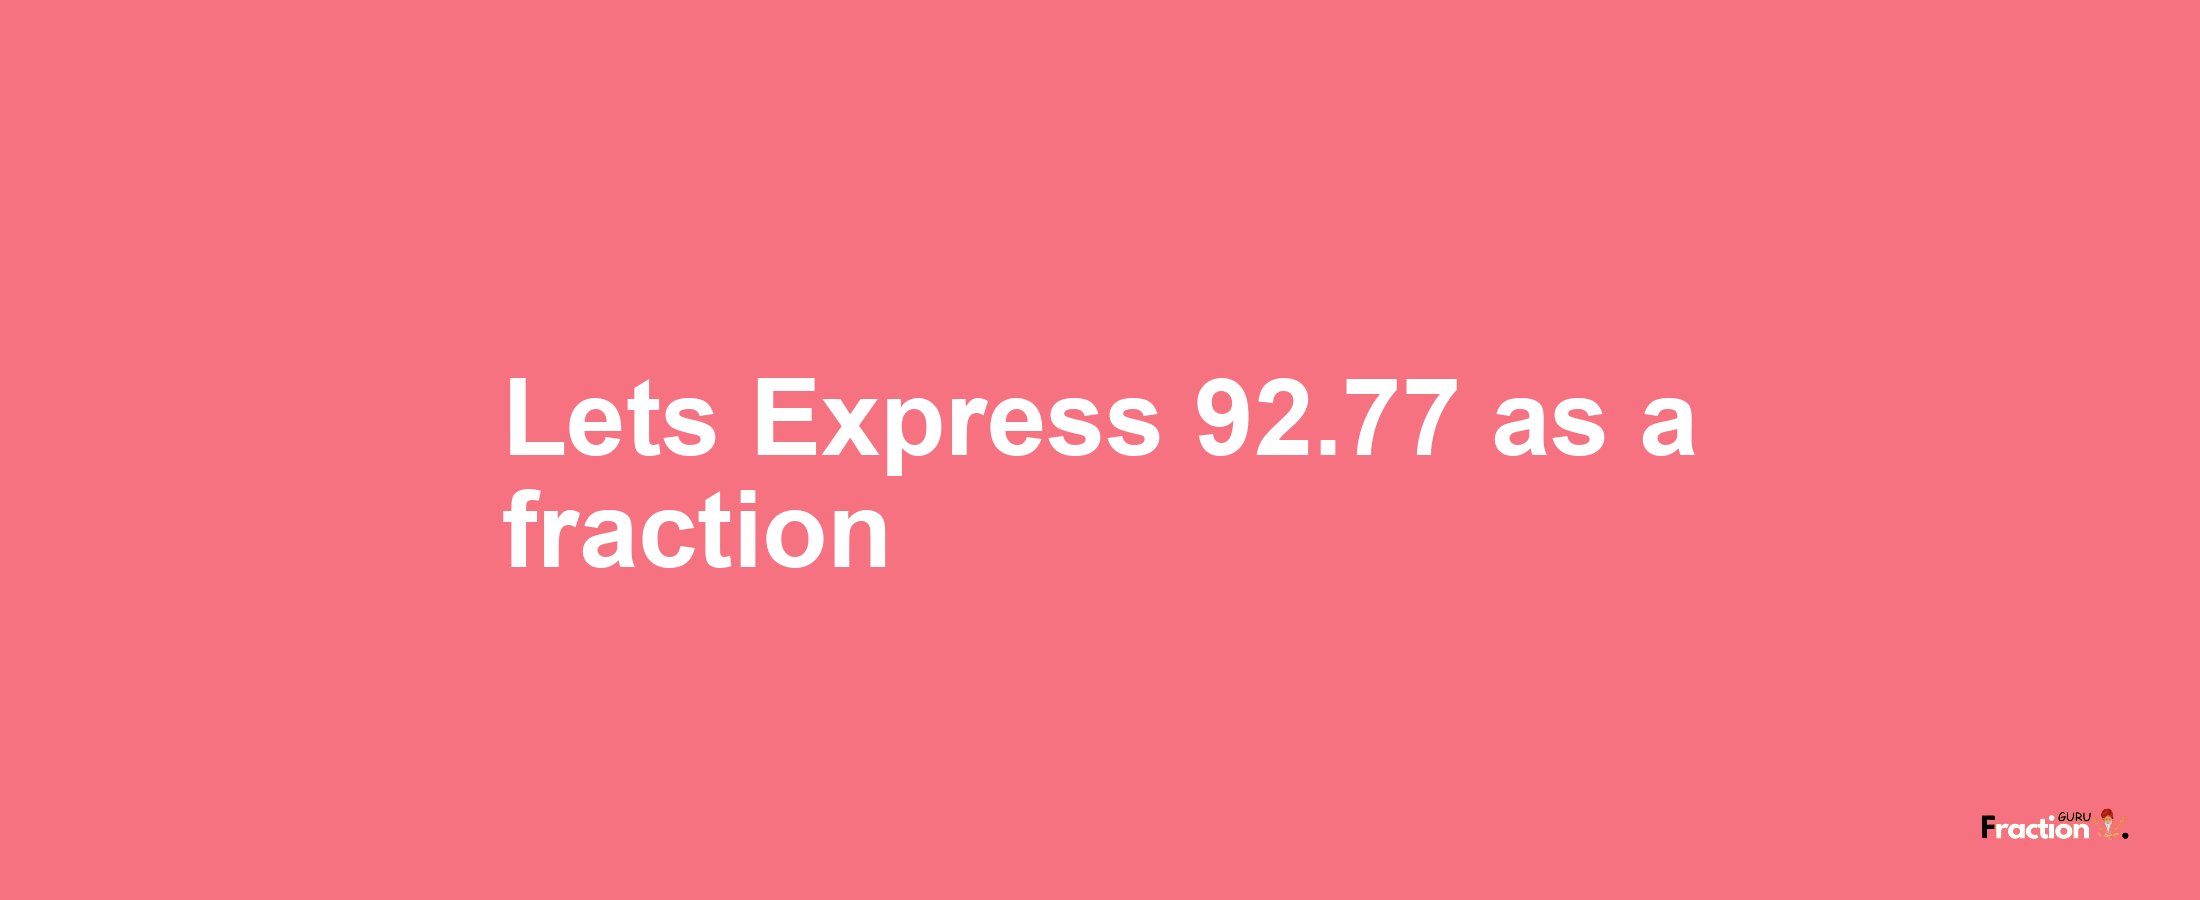 Lets Express 92.77 as afraction